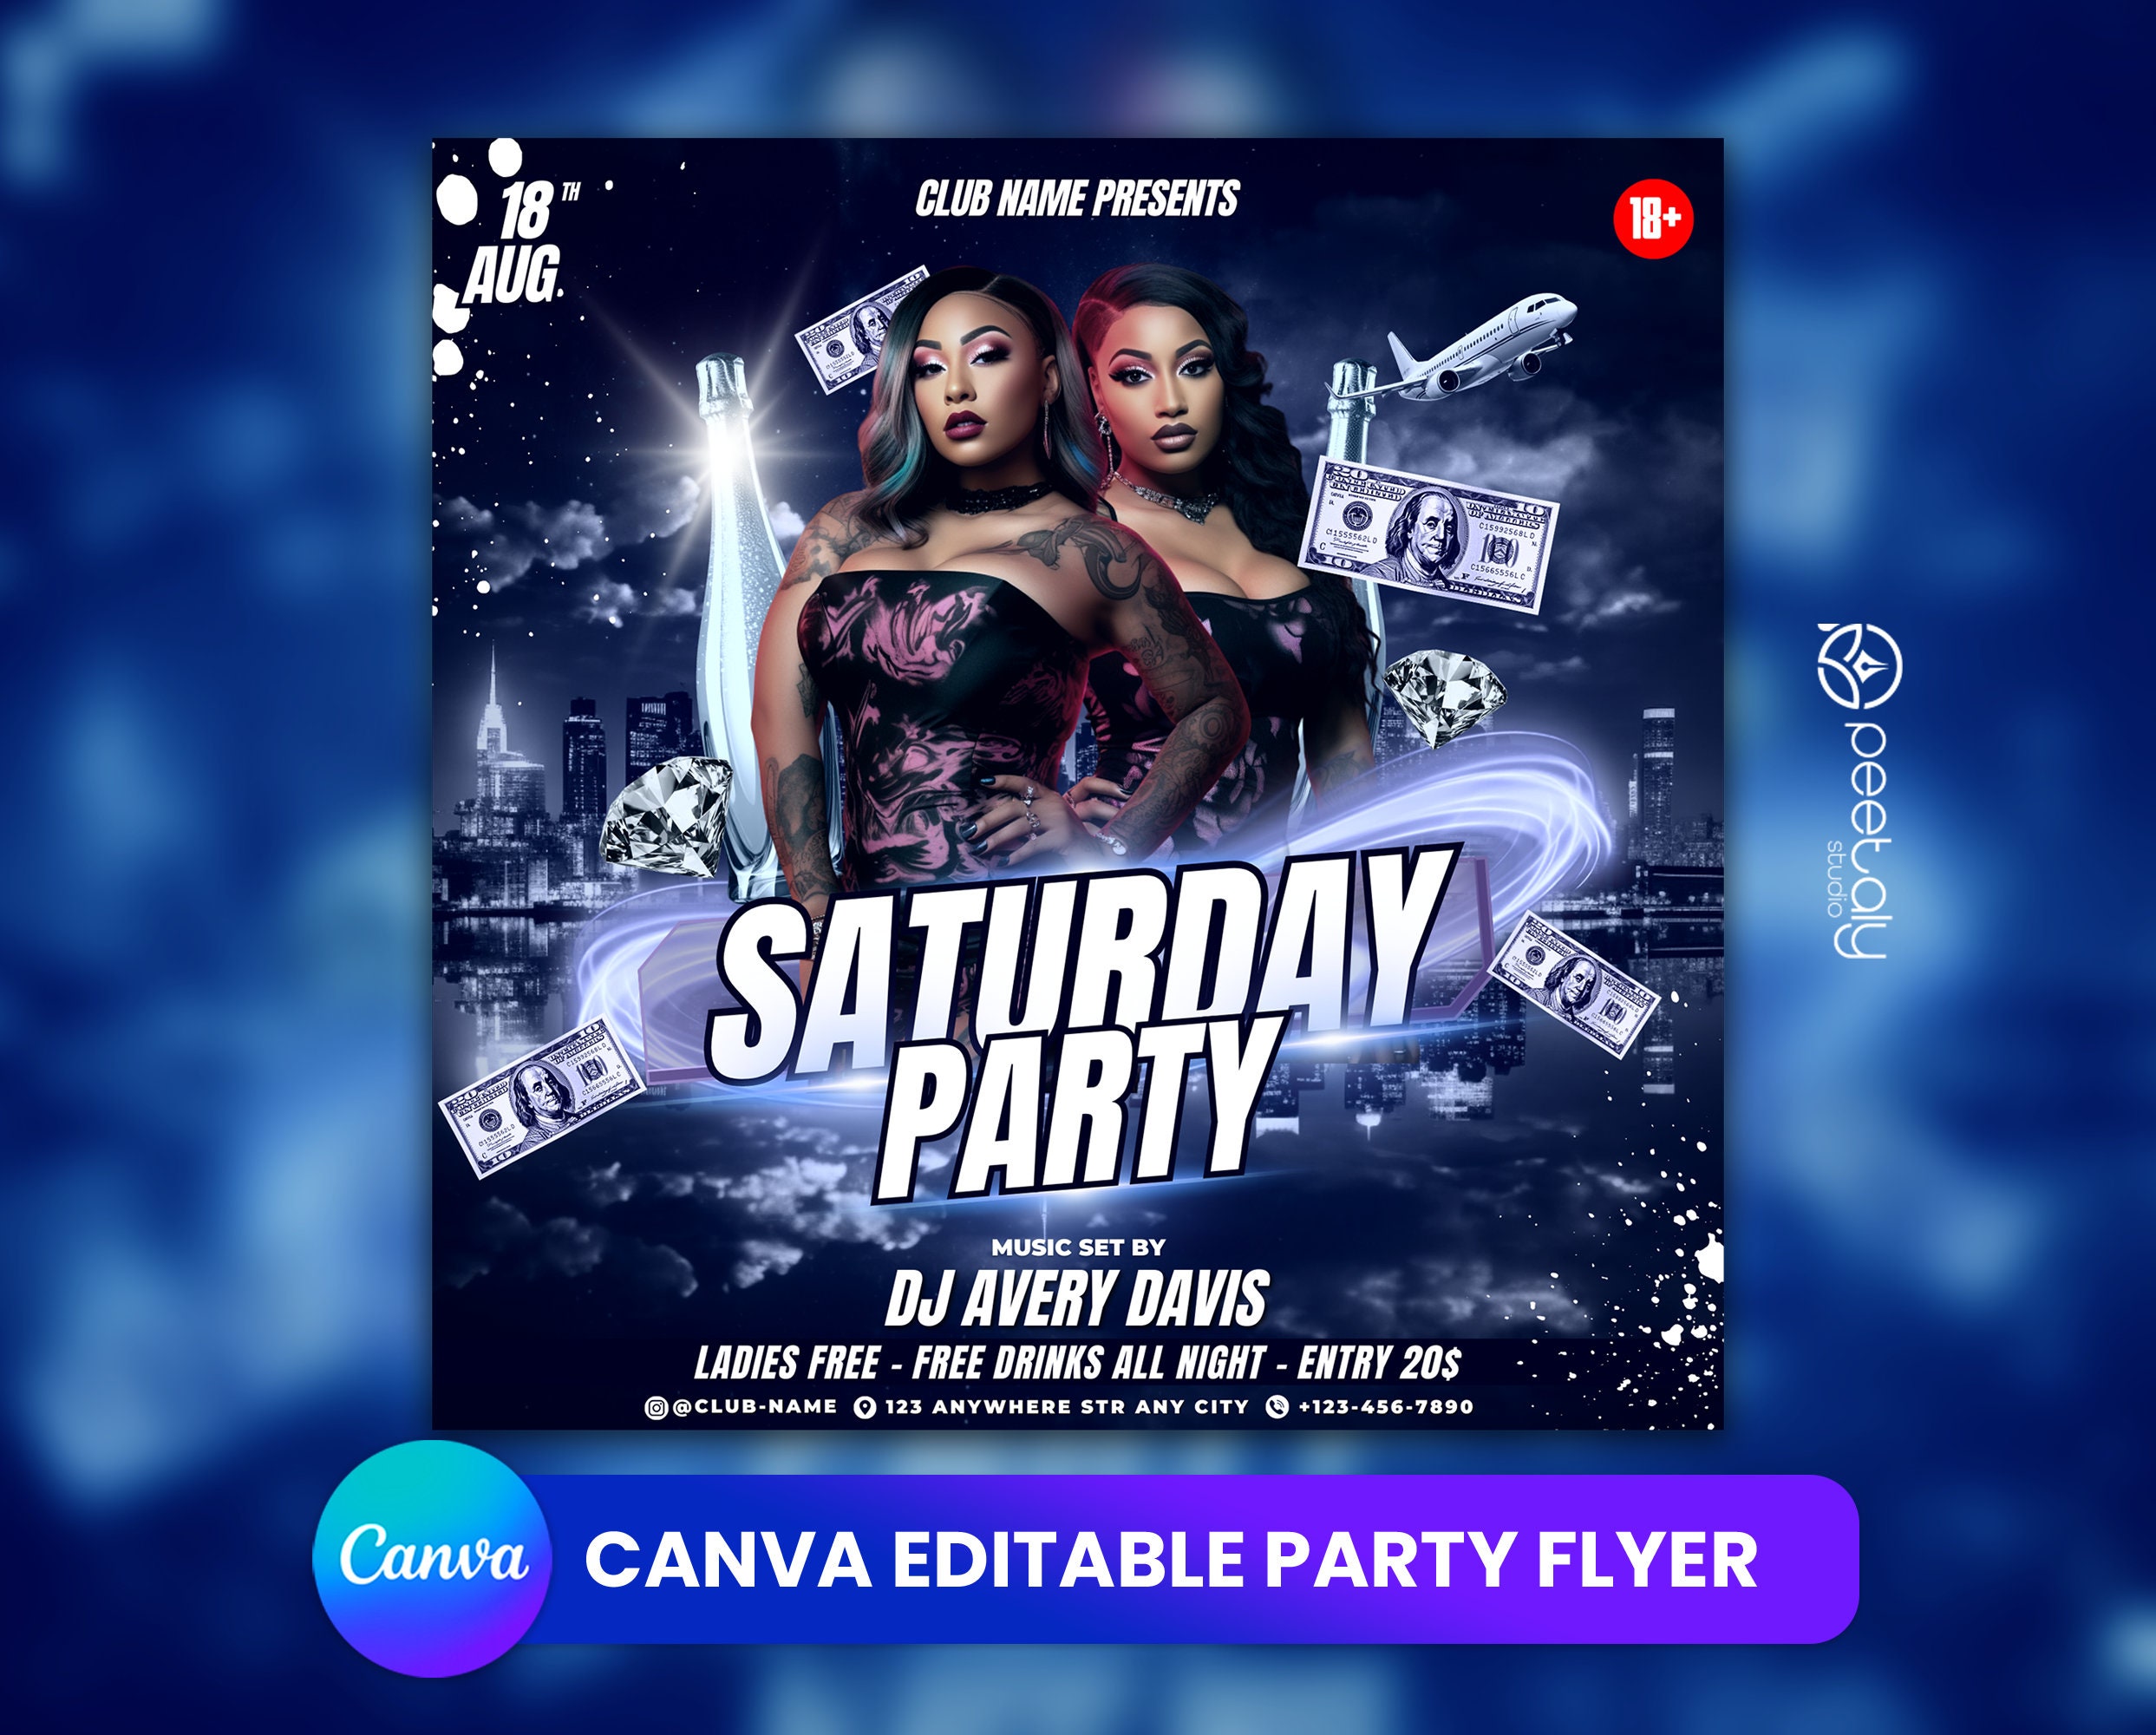 After Work Friday Night Club Party Flyer Graphic by StarPixels11 · Creative  Fabrica